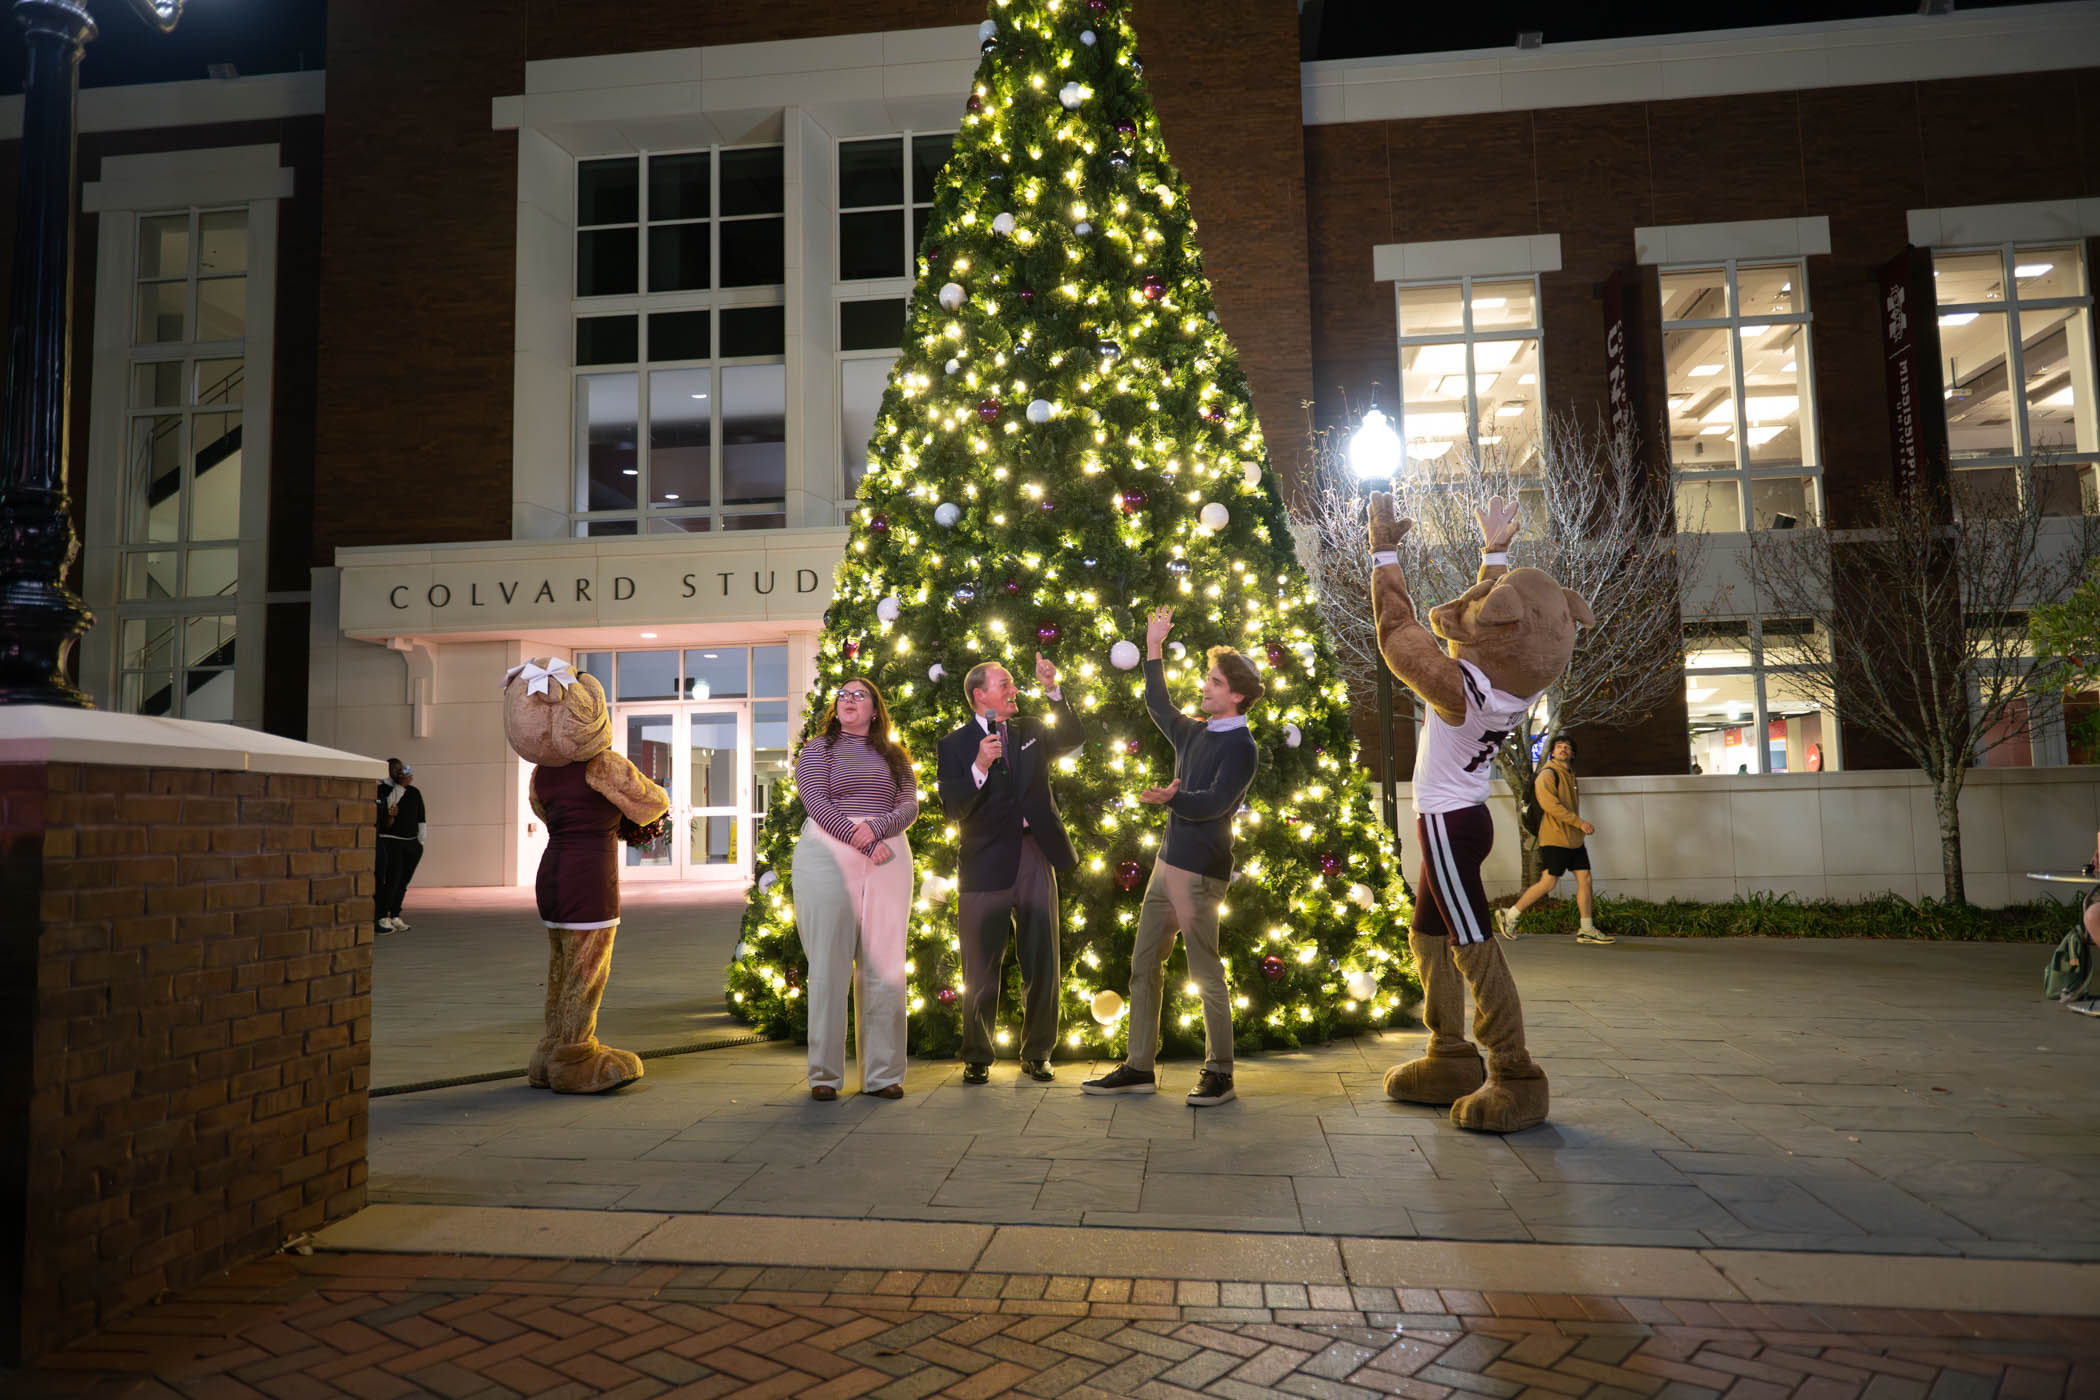 People and bulldog costume mascots in front of lit Christmas tree